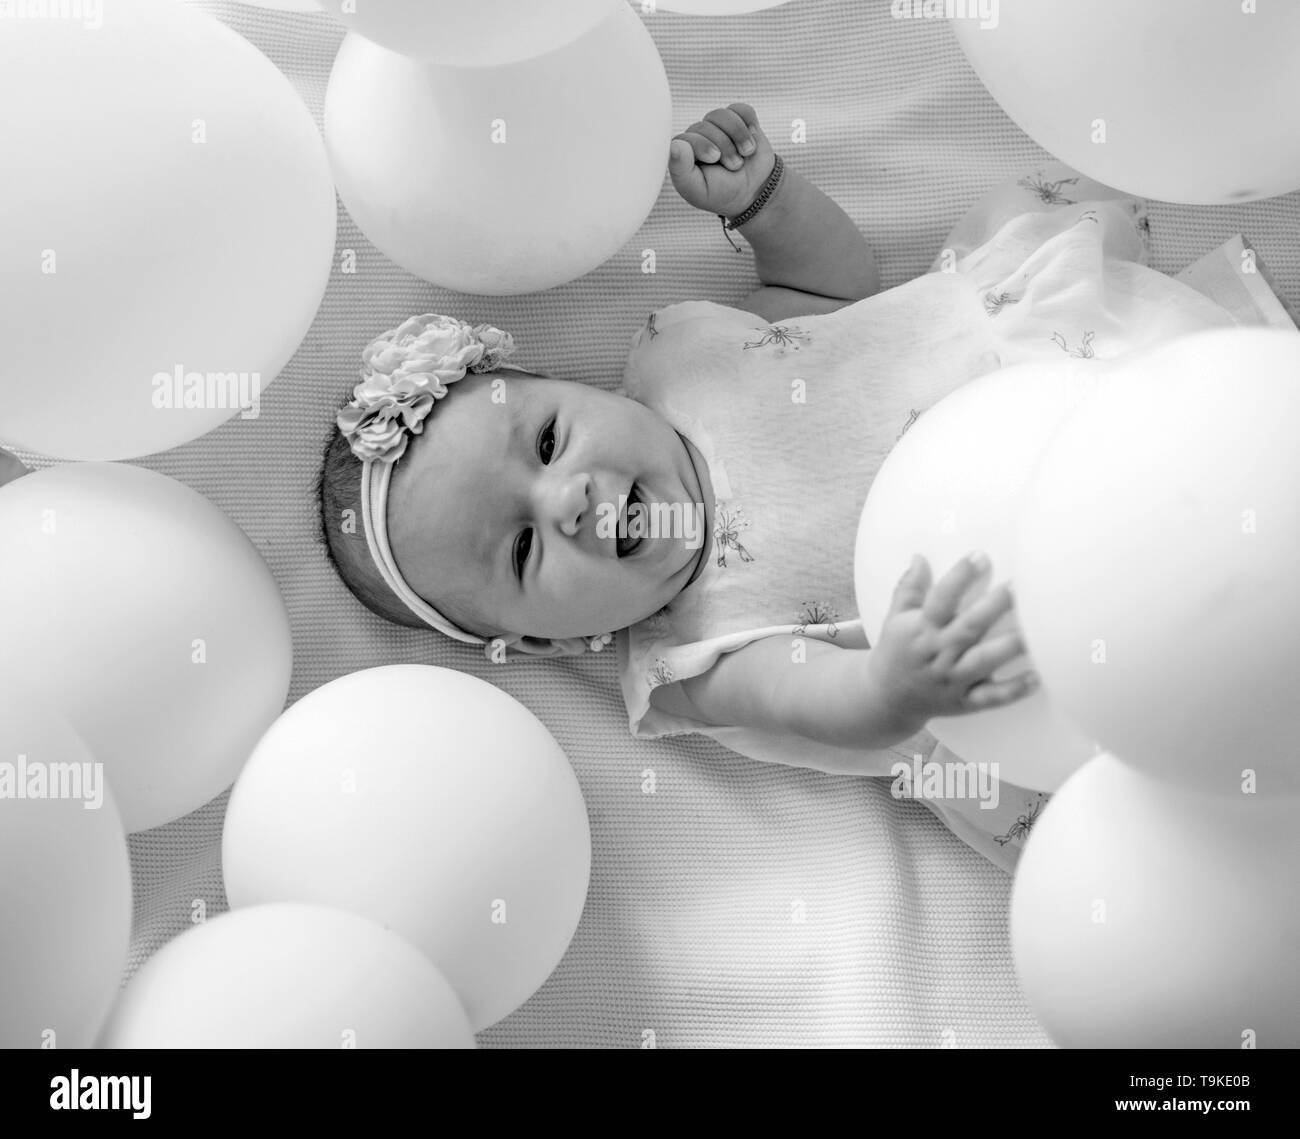 Pure happiness. Family. Child care. Childrens day. Small girl. Happy birthday. Sweet little baby. New life and birth. Portrait of happy little child Stock Photo